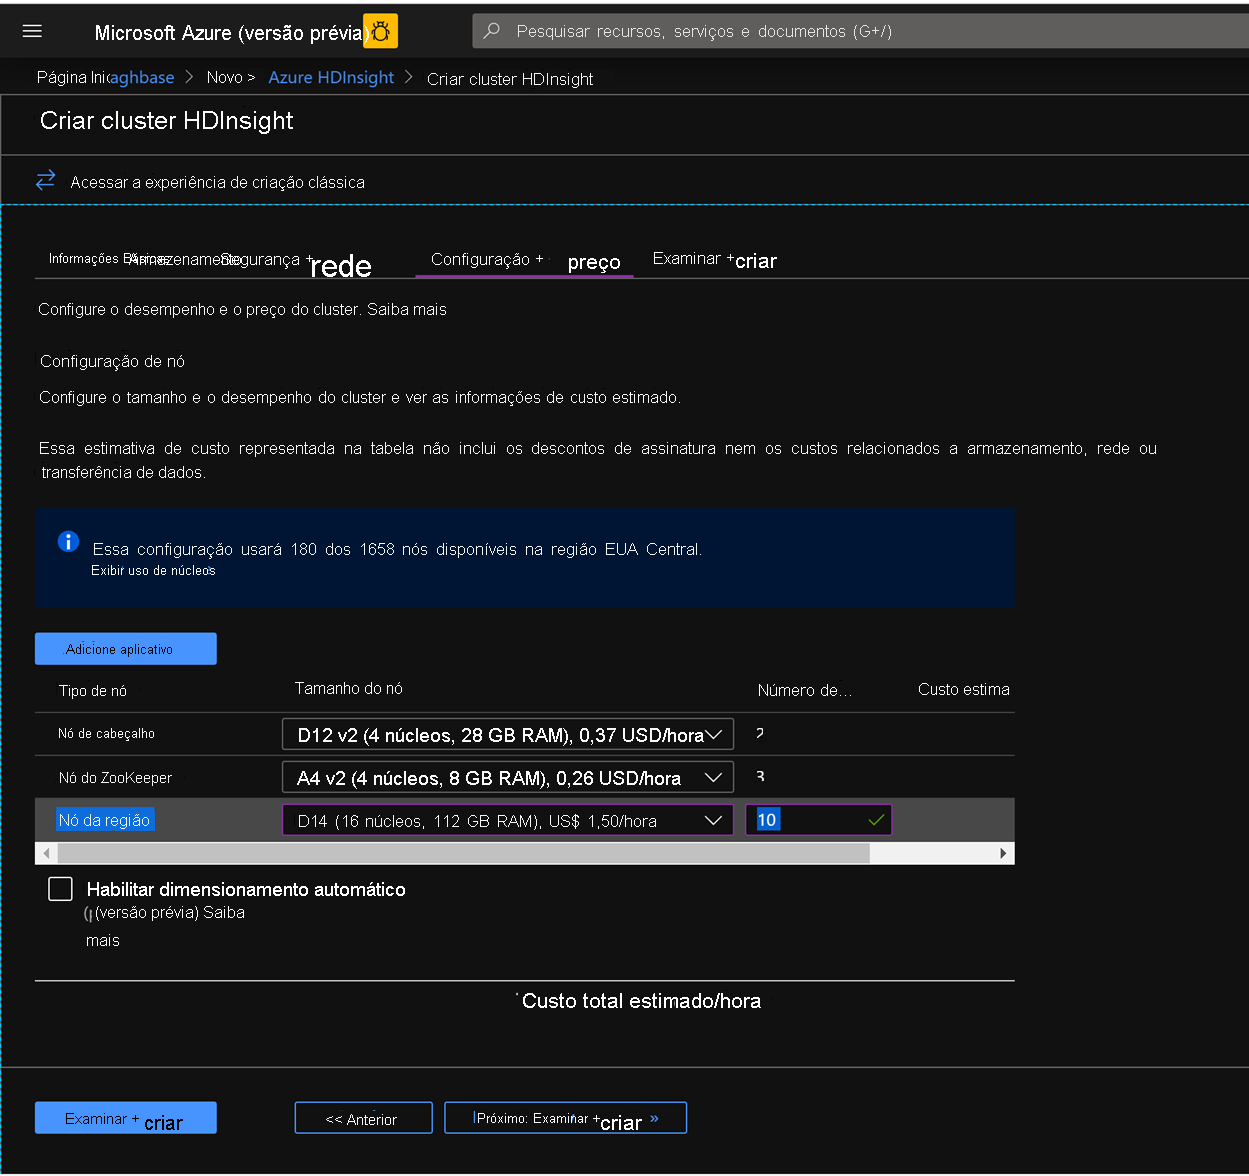 Configure nodes on Azure HDInsight in the Azure Portal.